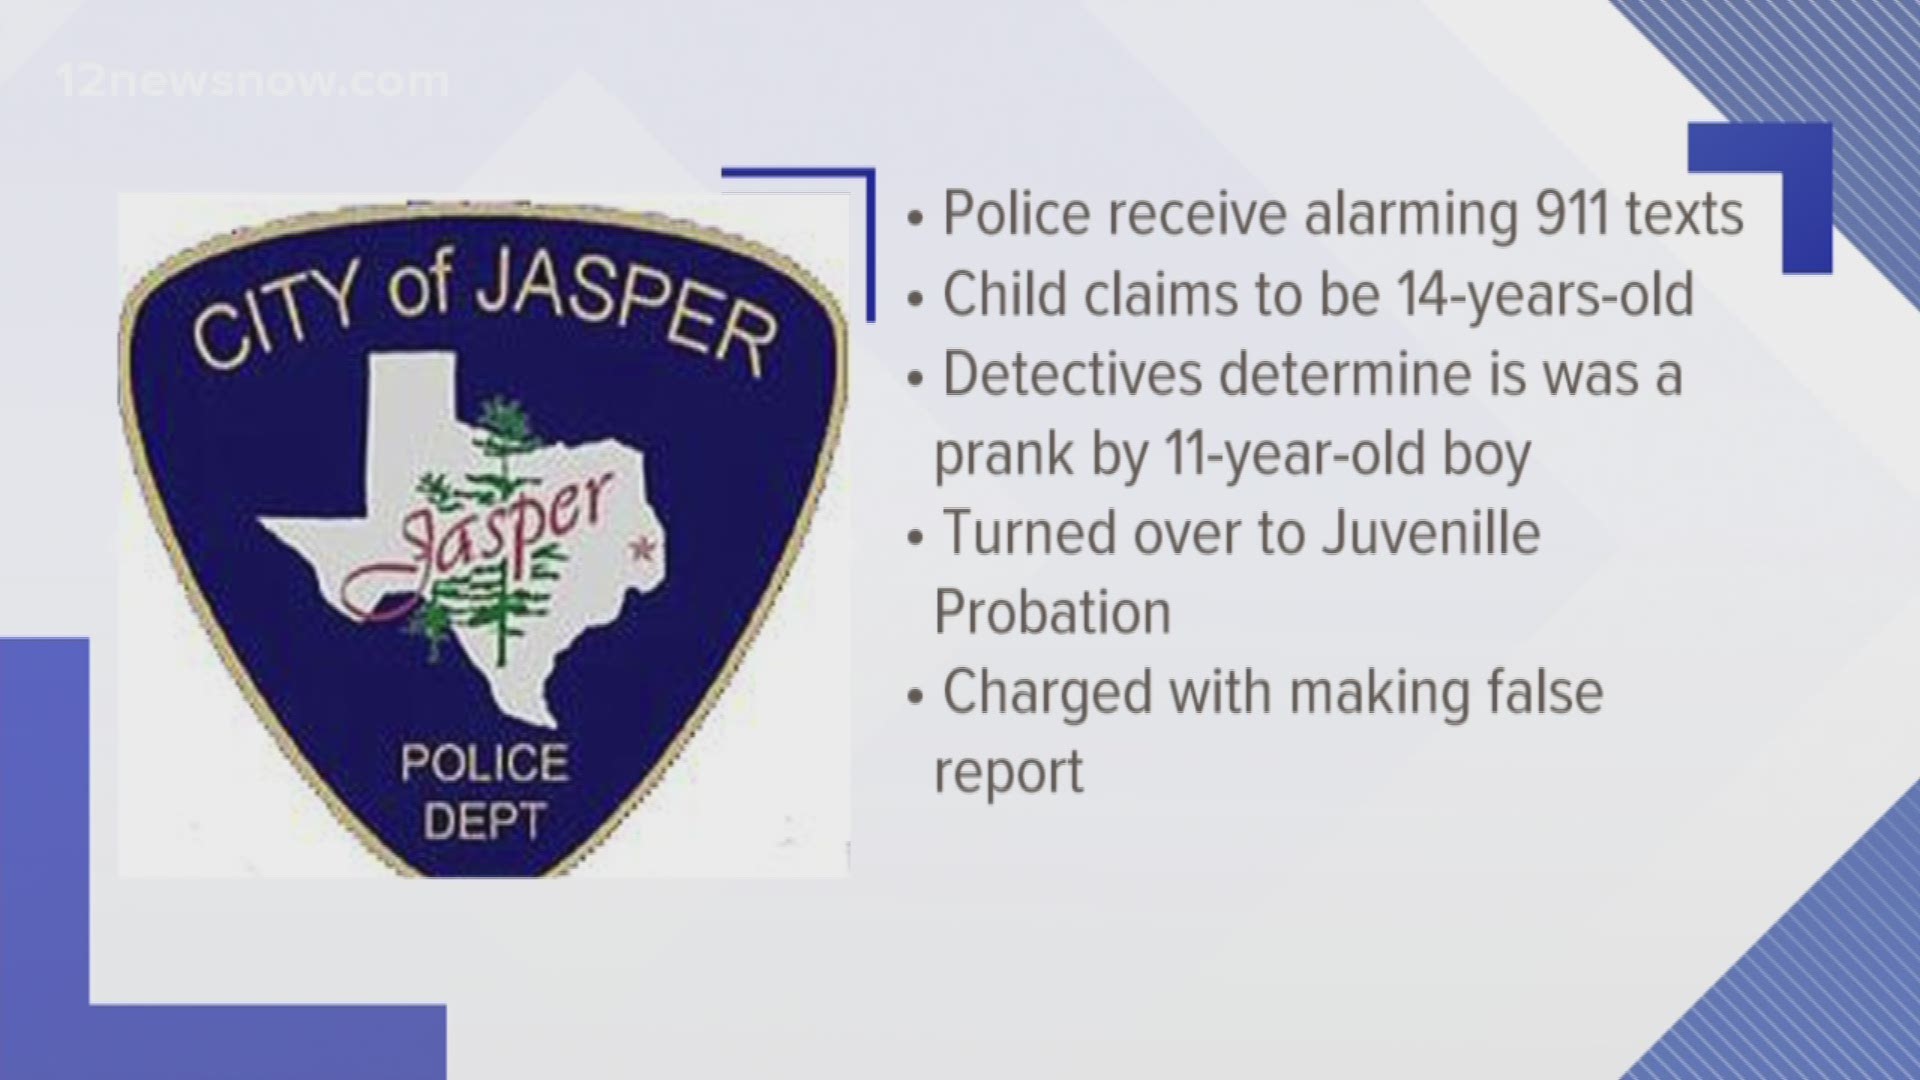 An 11-year-old boy is charged with making a false report after sending false messages to Jasper police.